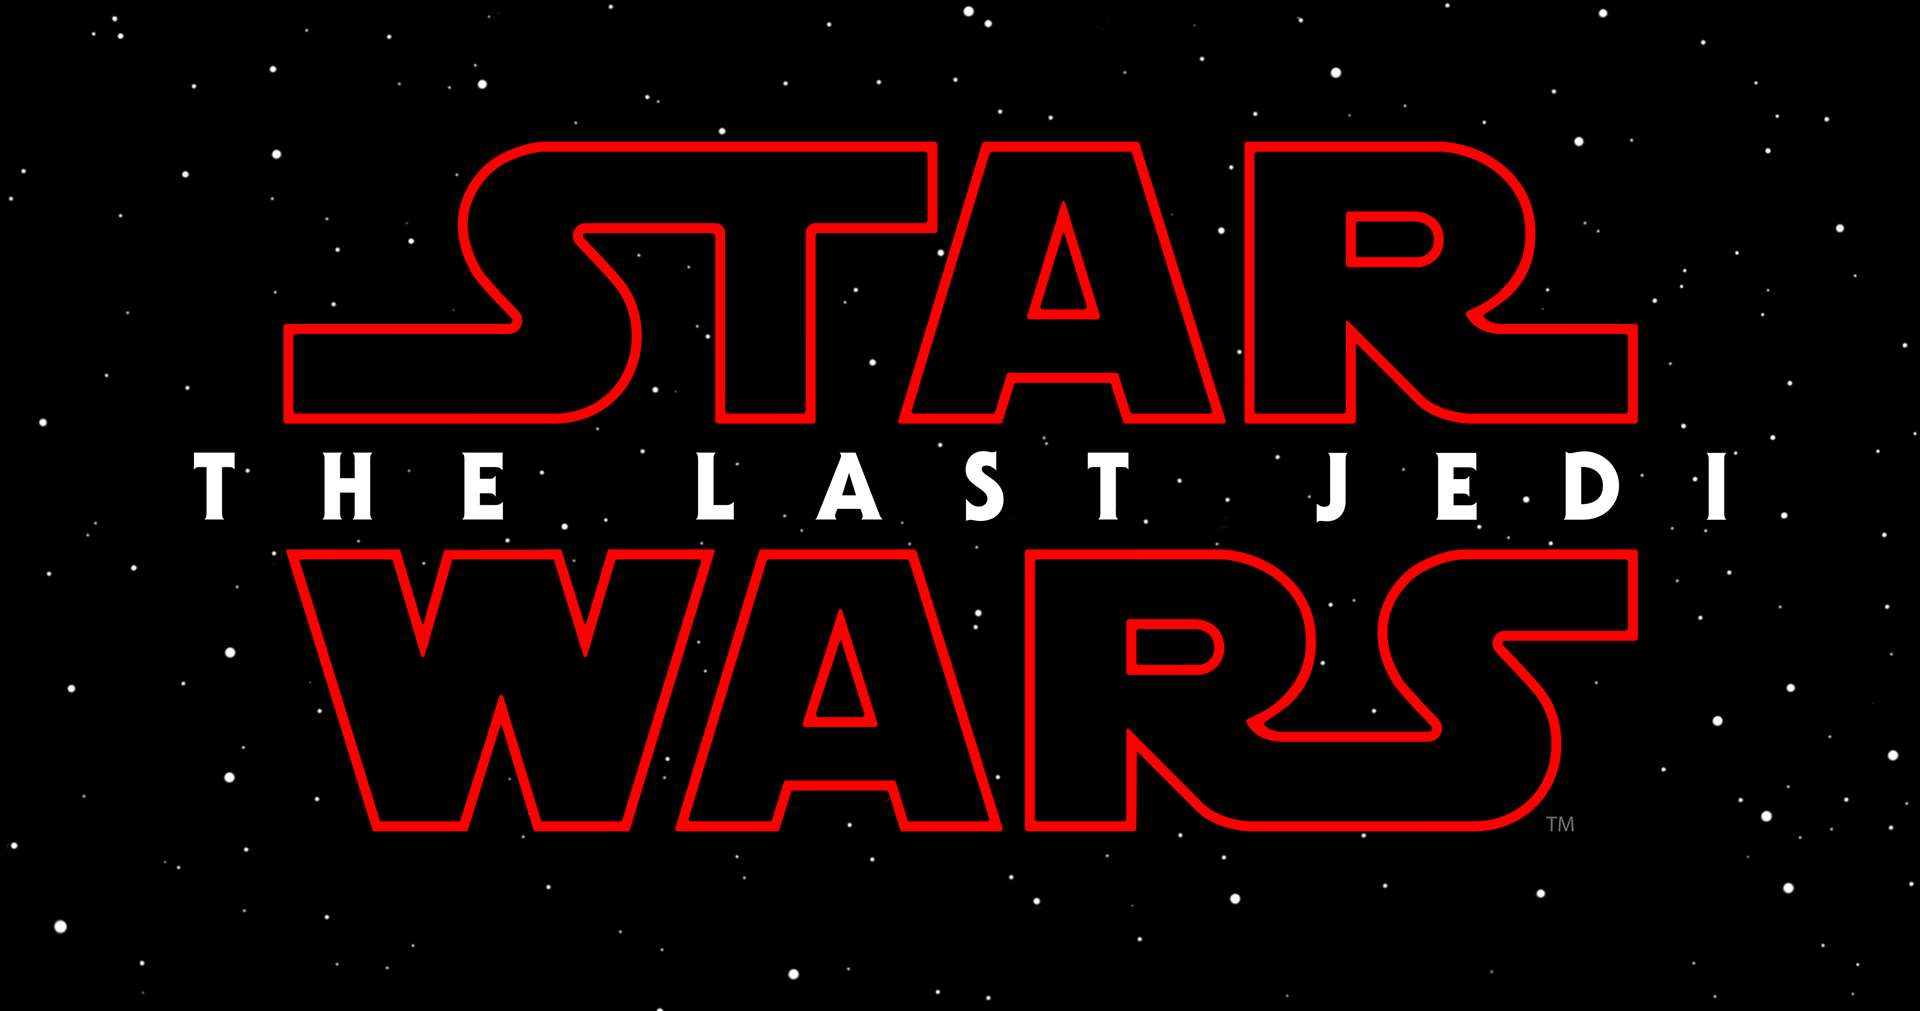 The Last Jedi will be the eighth Star Wars film